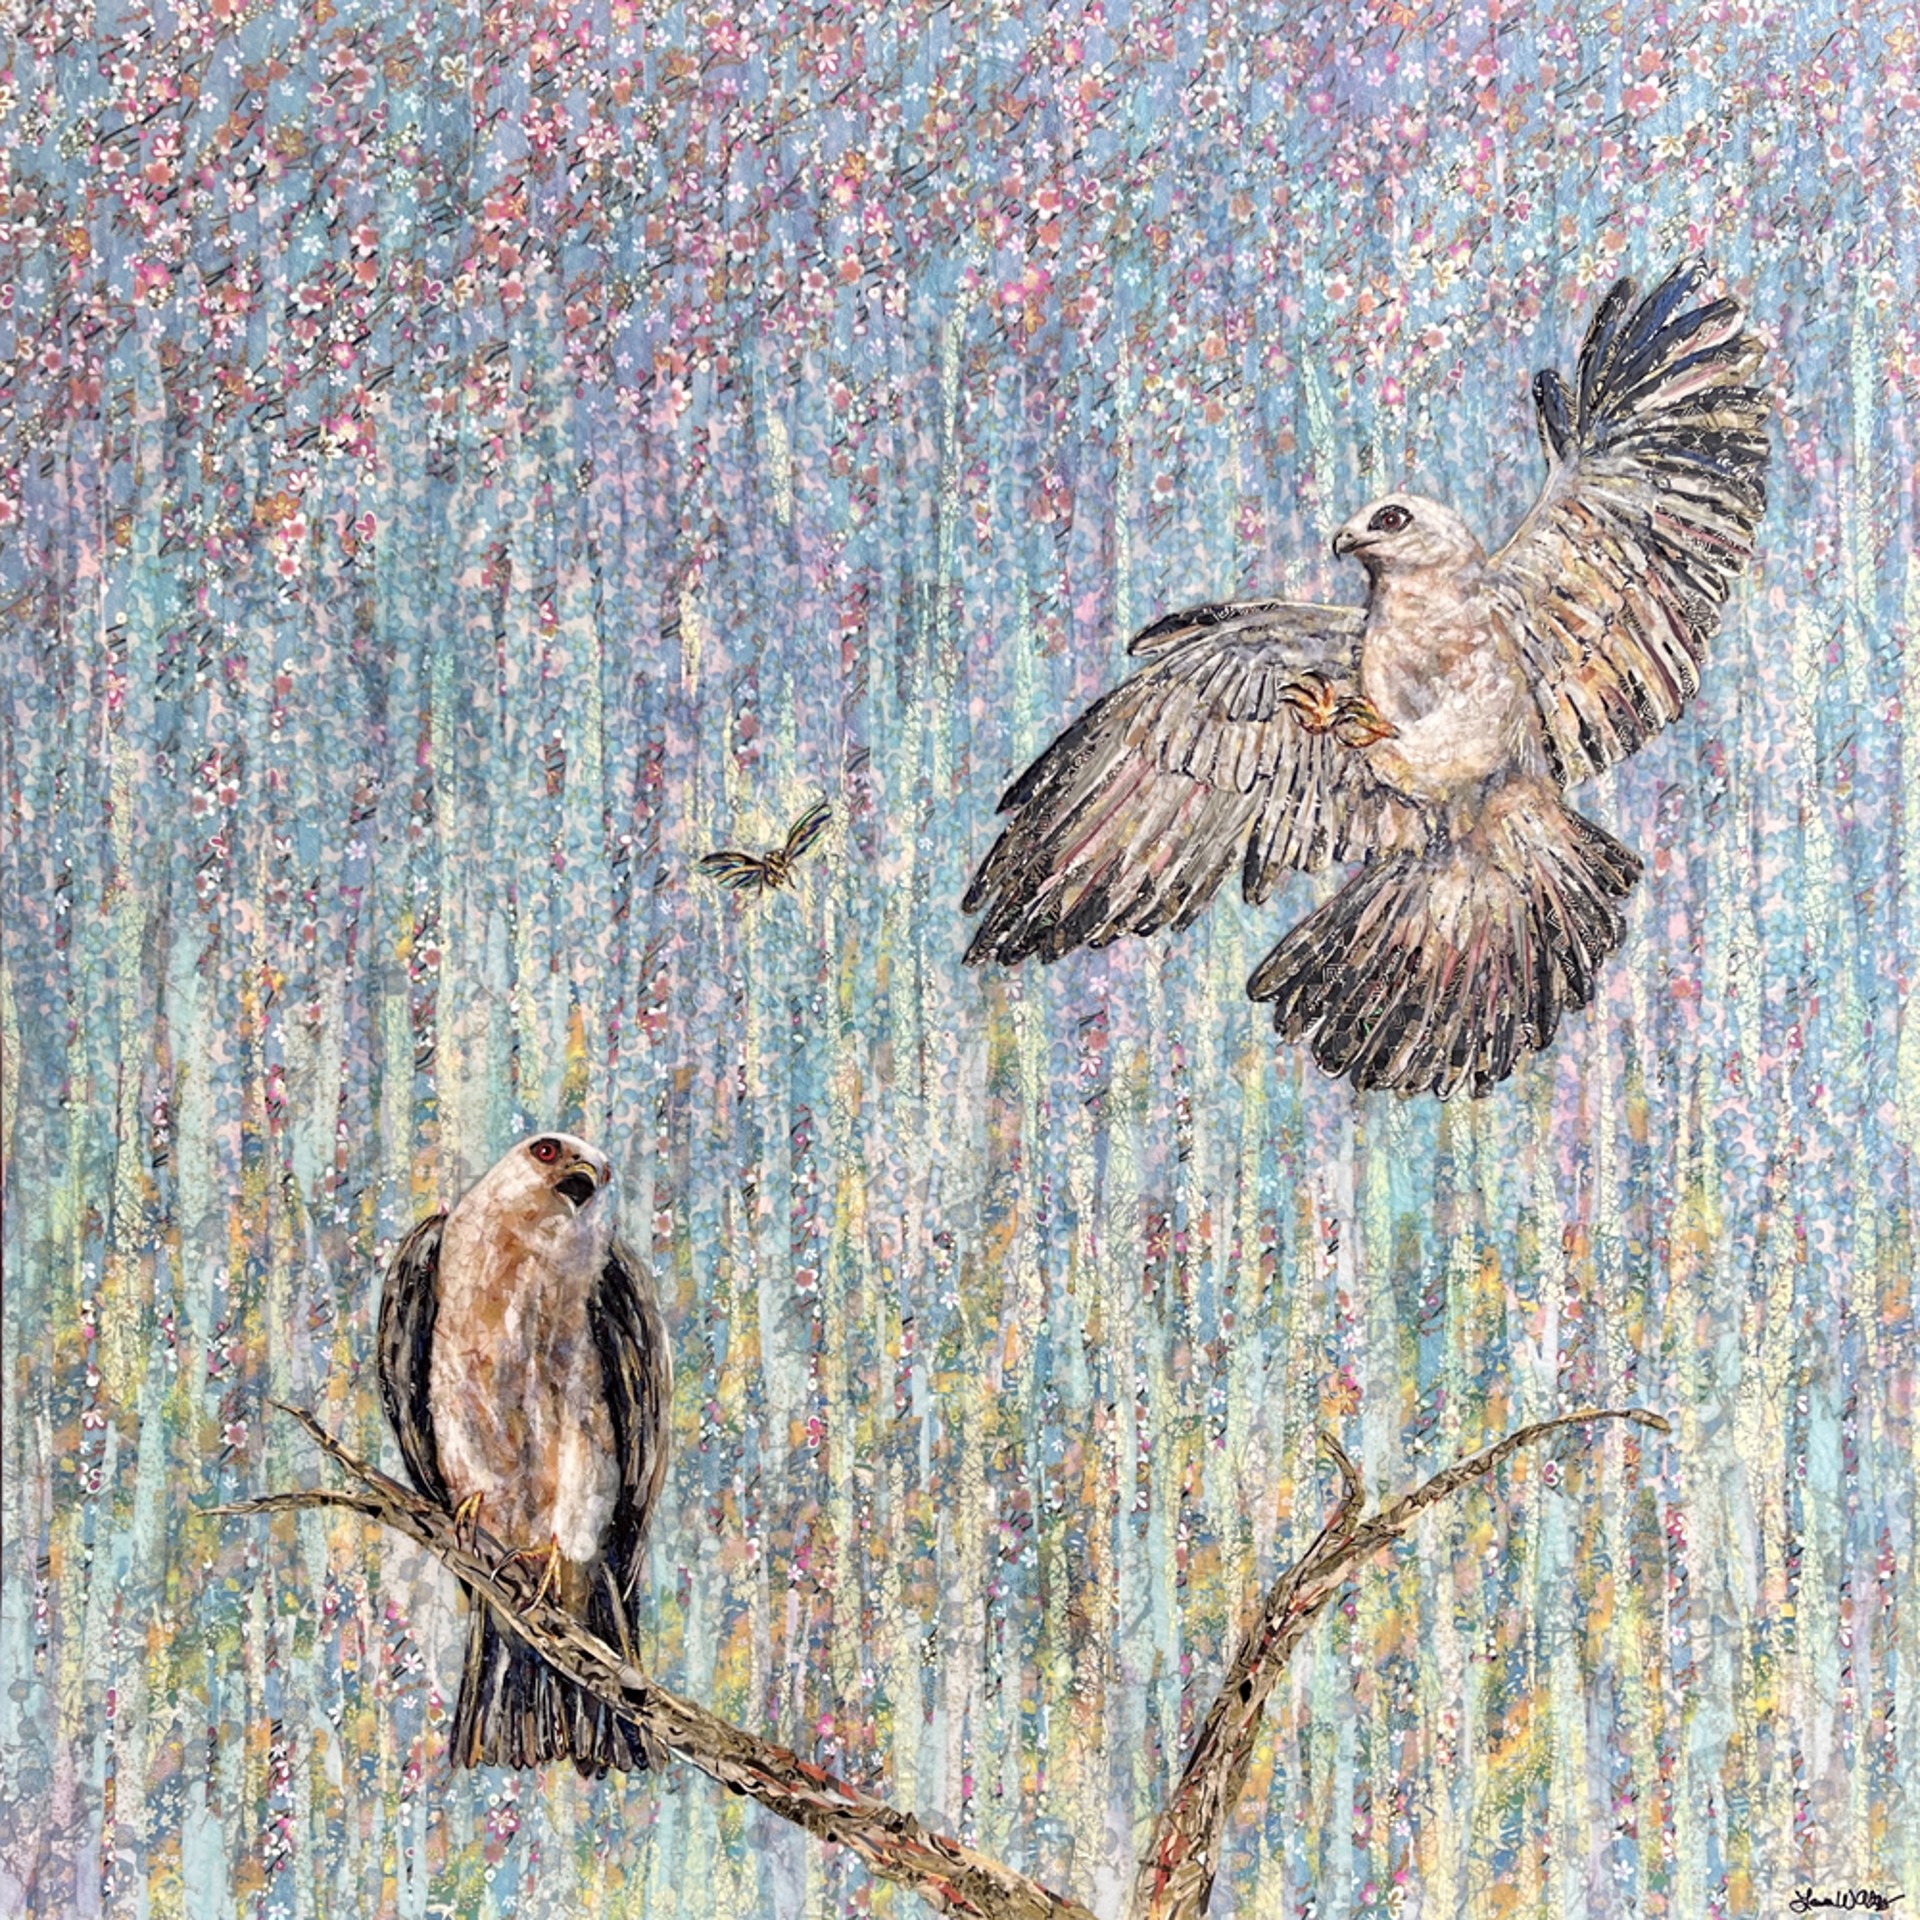 Mississippi Kites and Cicada by Laura Adams